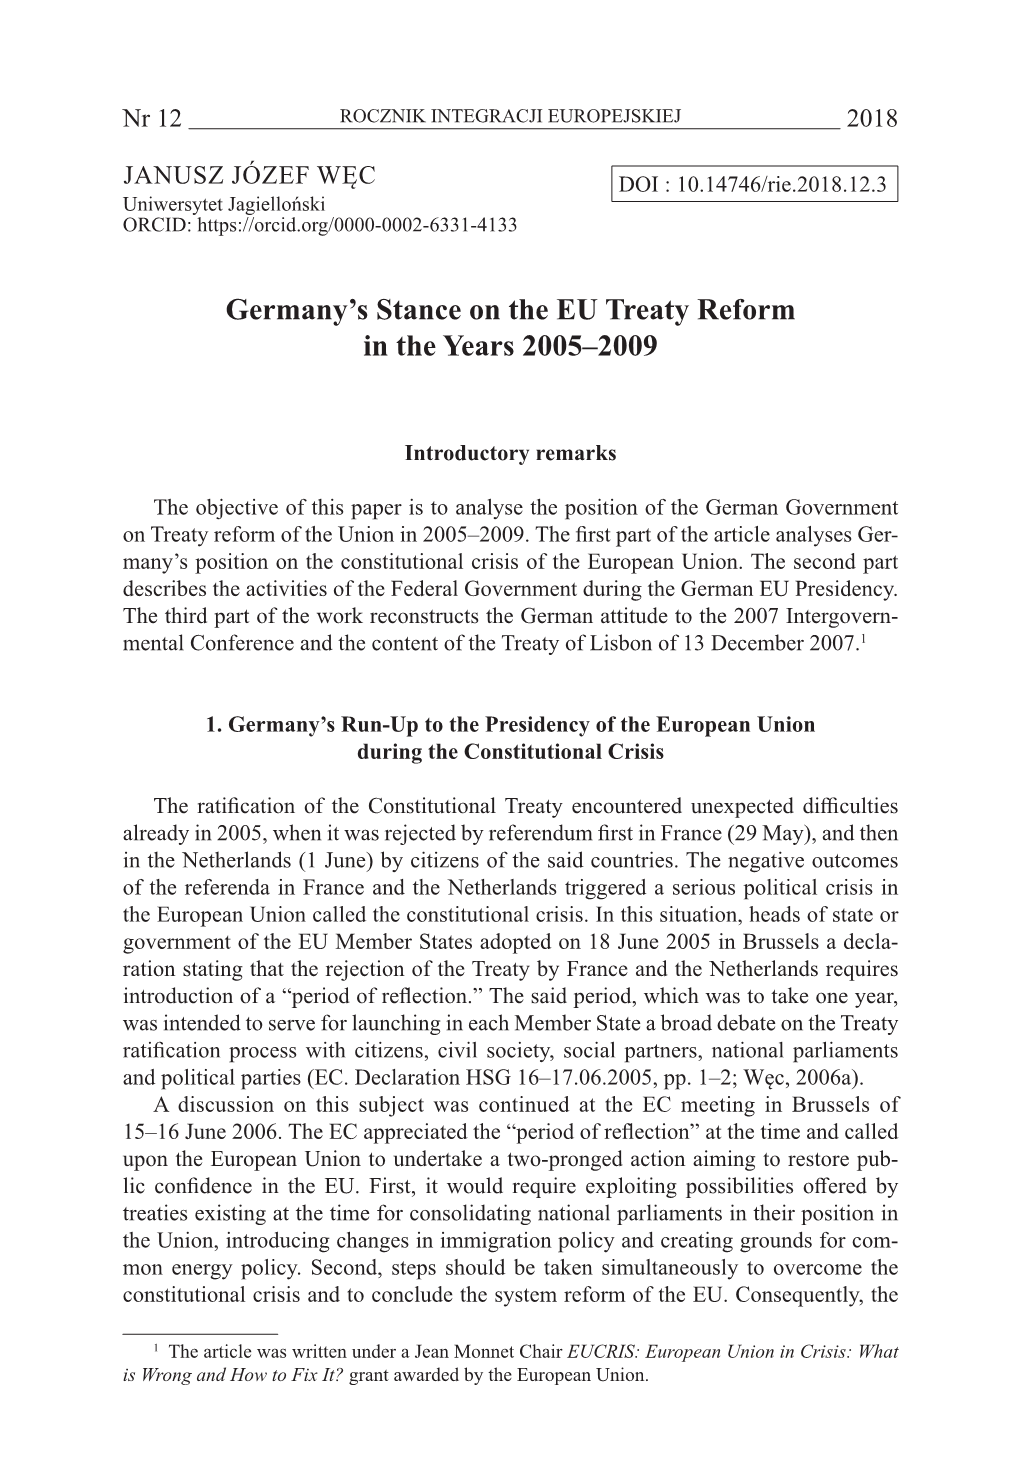 Germany's Stance on the EU Treaty Reform in the Years 2005–2009